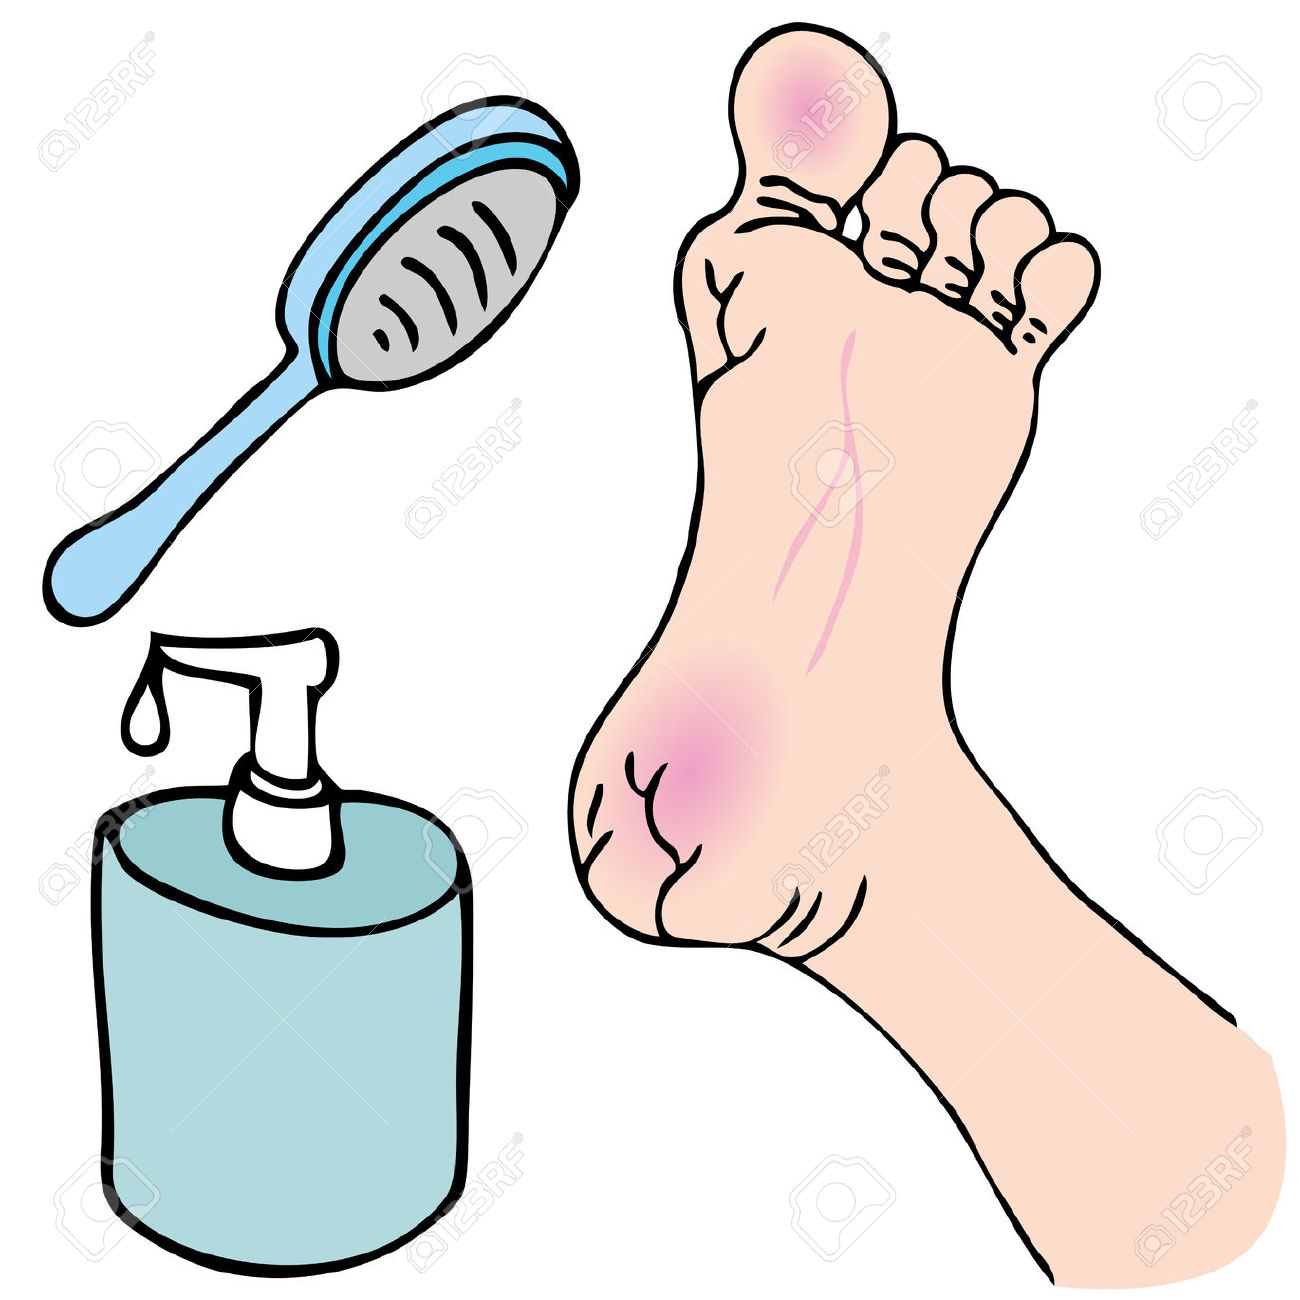 Caring clipart foot. Care free download best